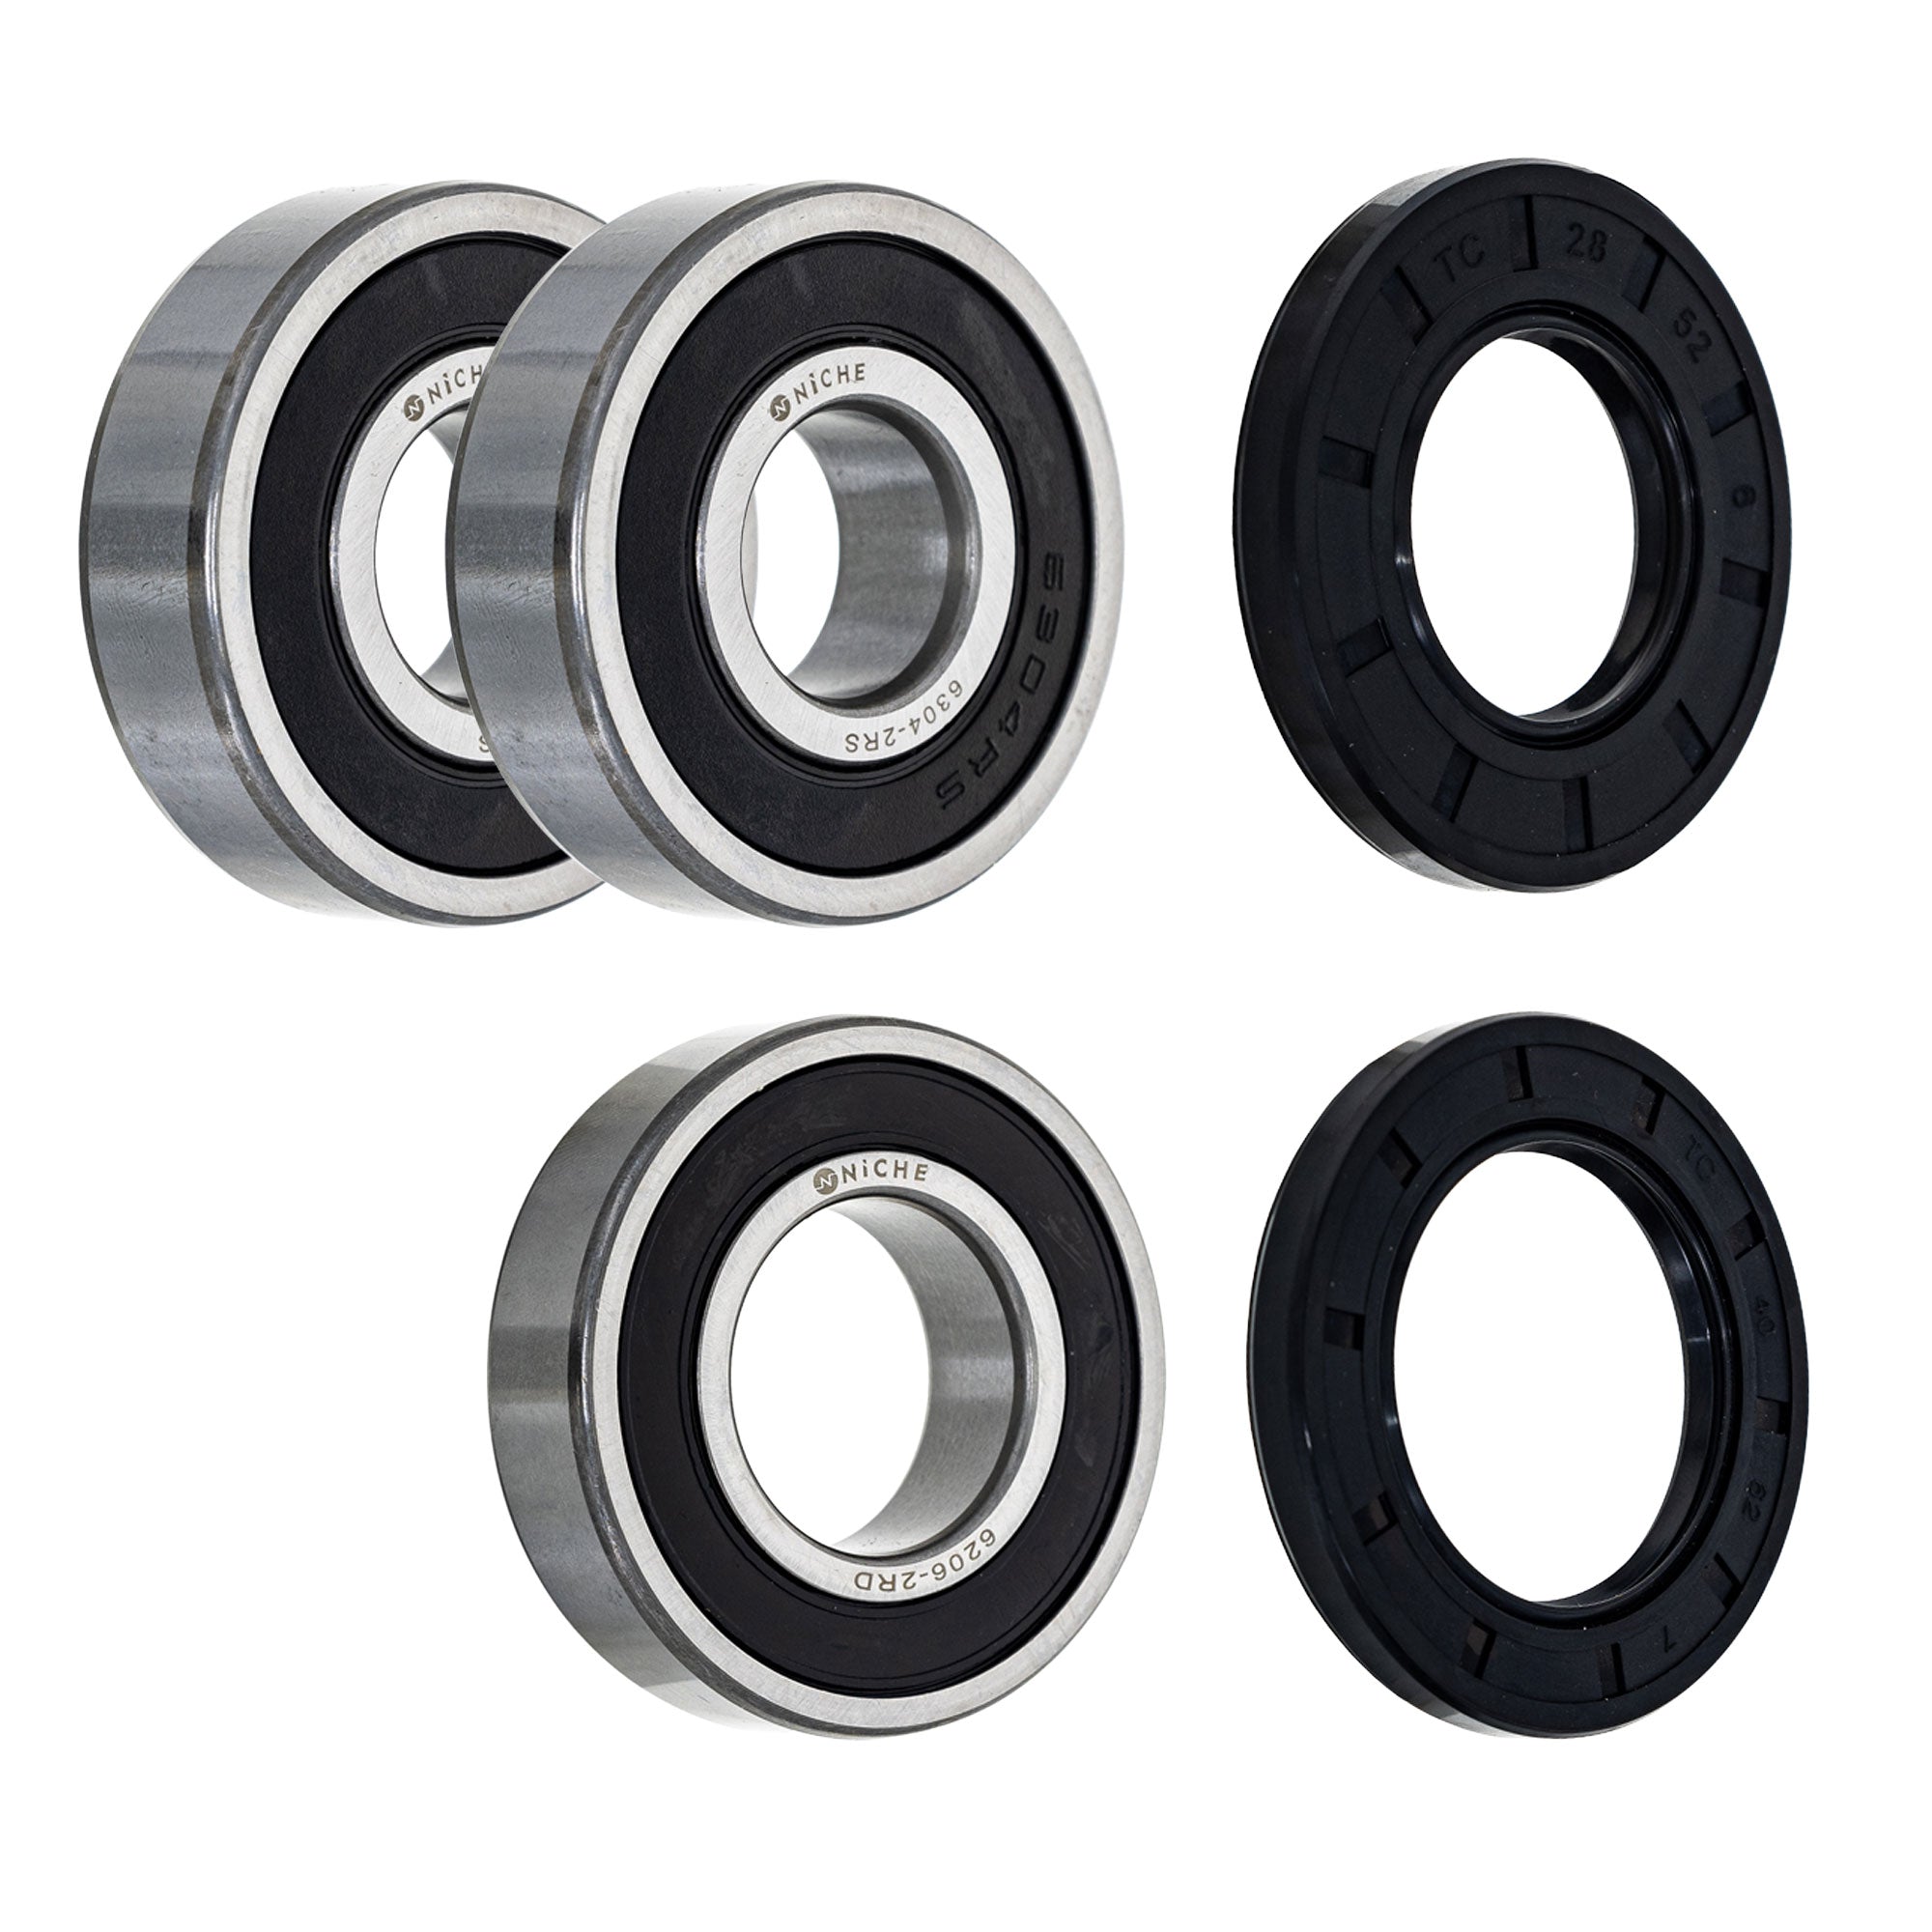 Wheel Bearing Seal Kit for zOTHER ZR1100 NICHE MK1008933